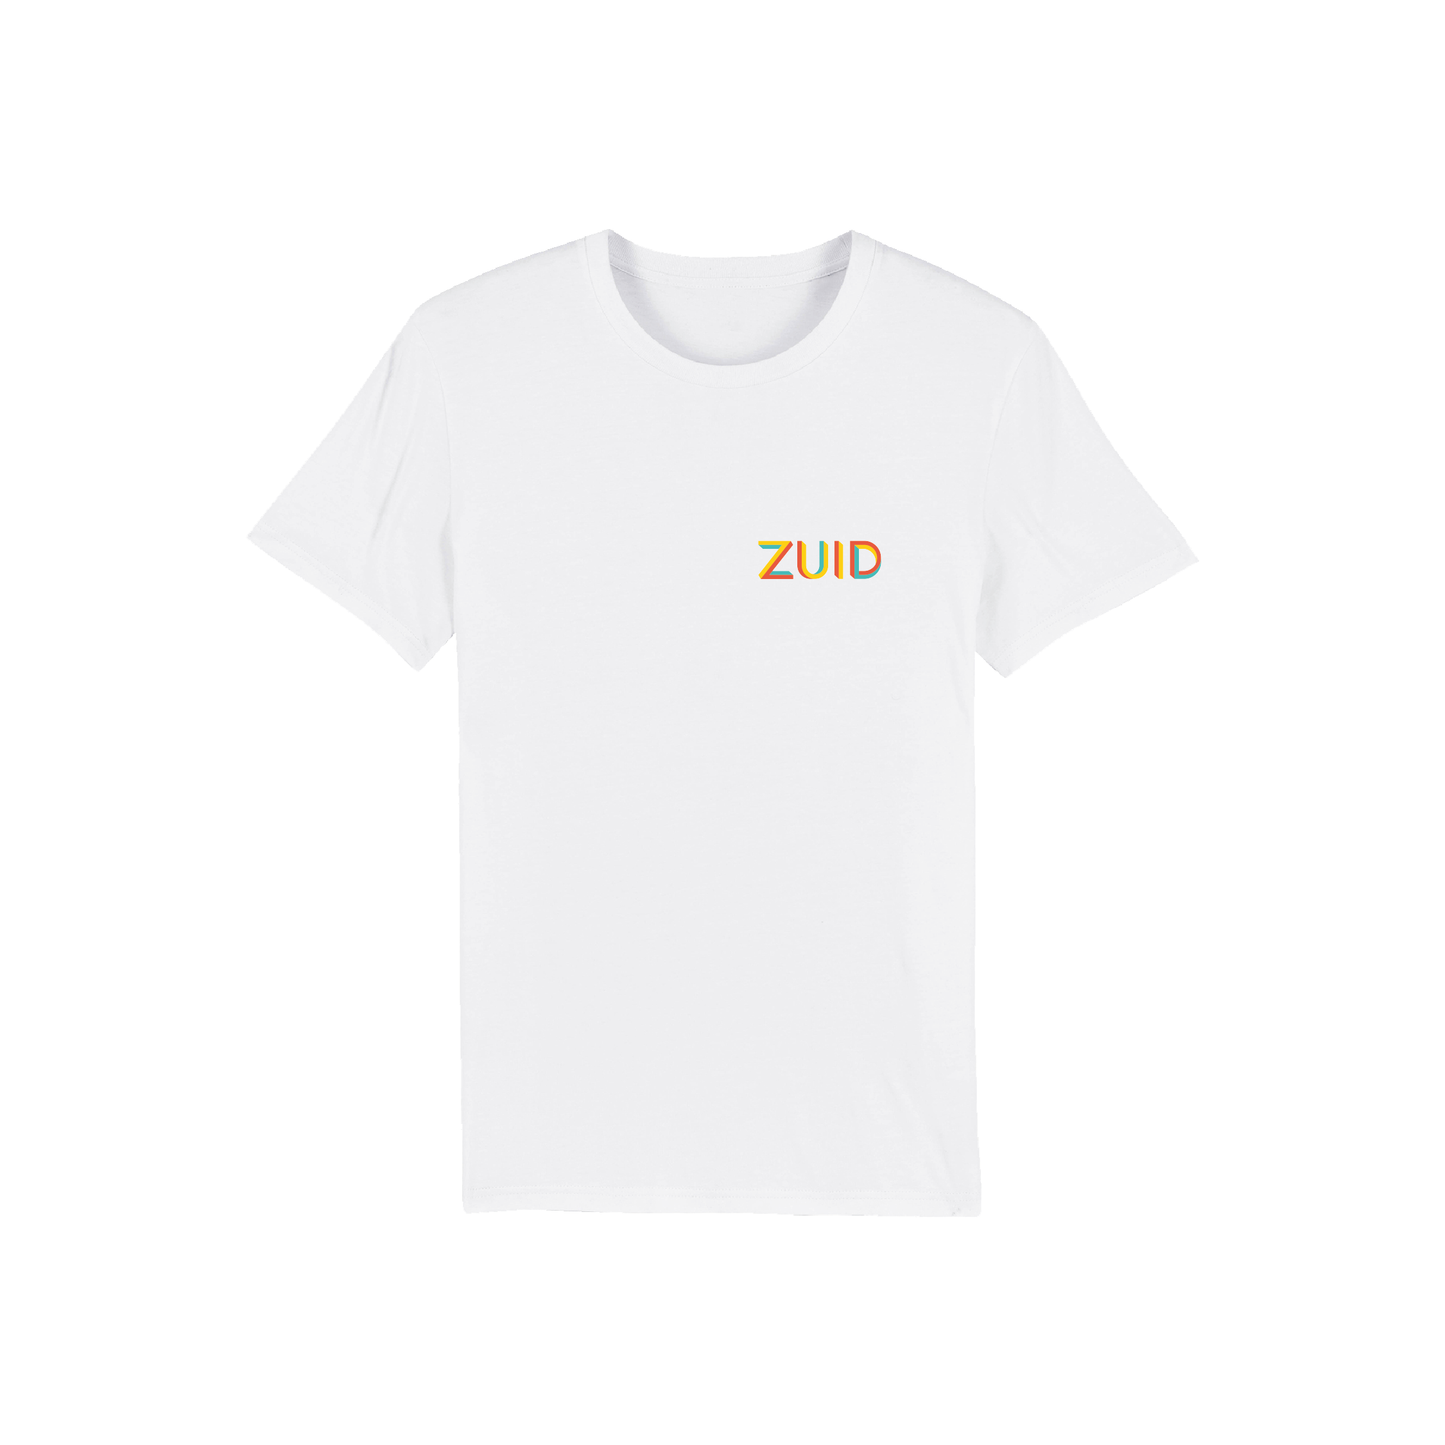 Kids Zuid Color T-shirt White